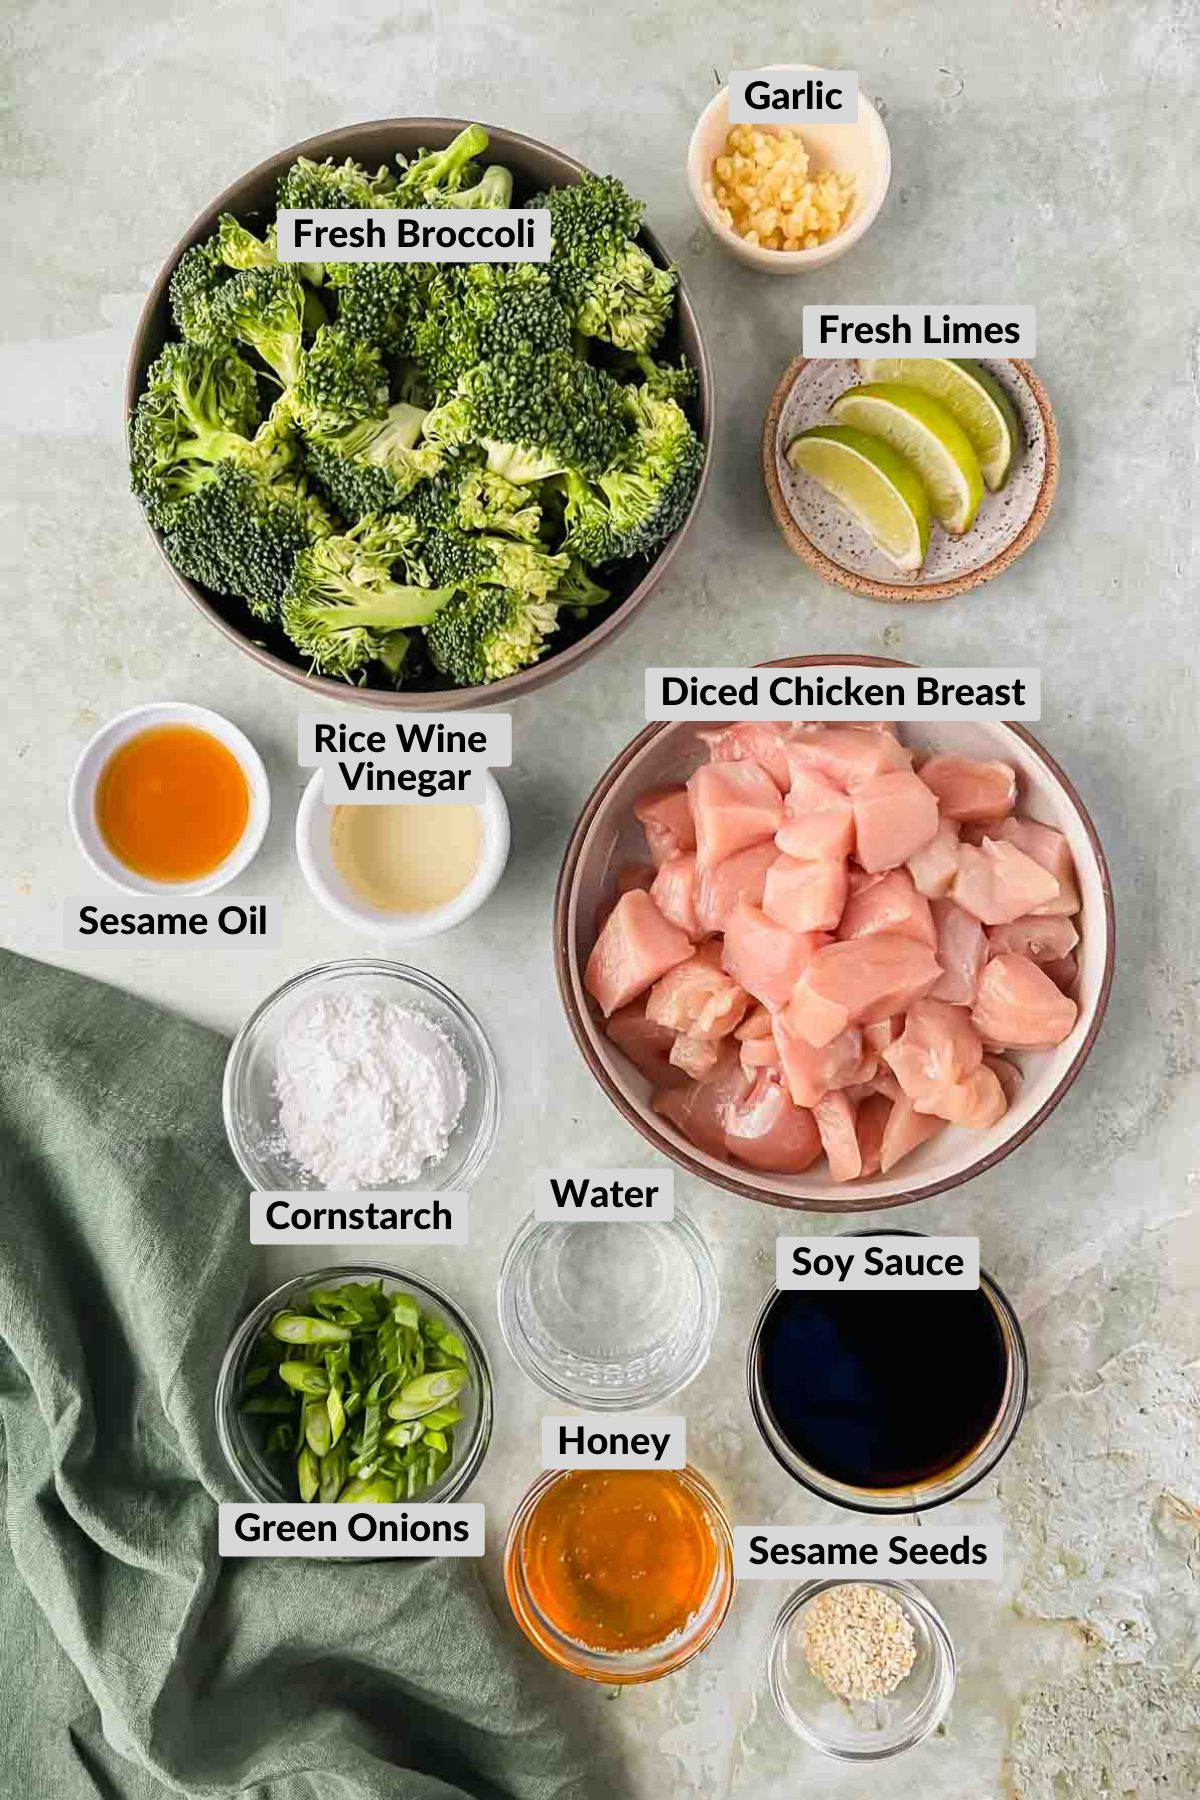 ingredients for teriyaki chicken and broccoli in individual bowls.